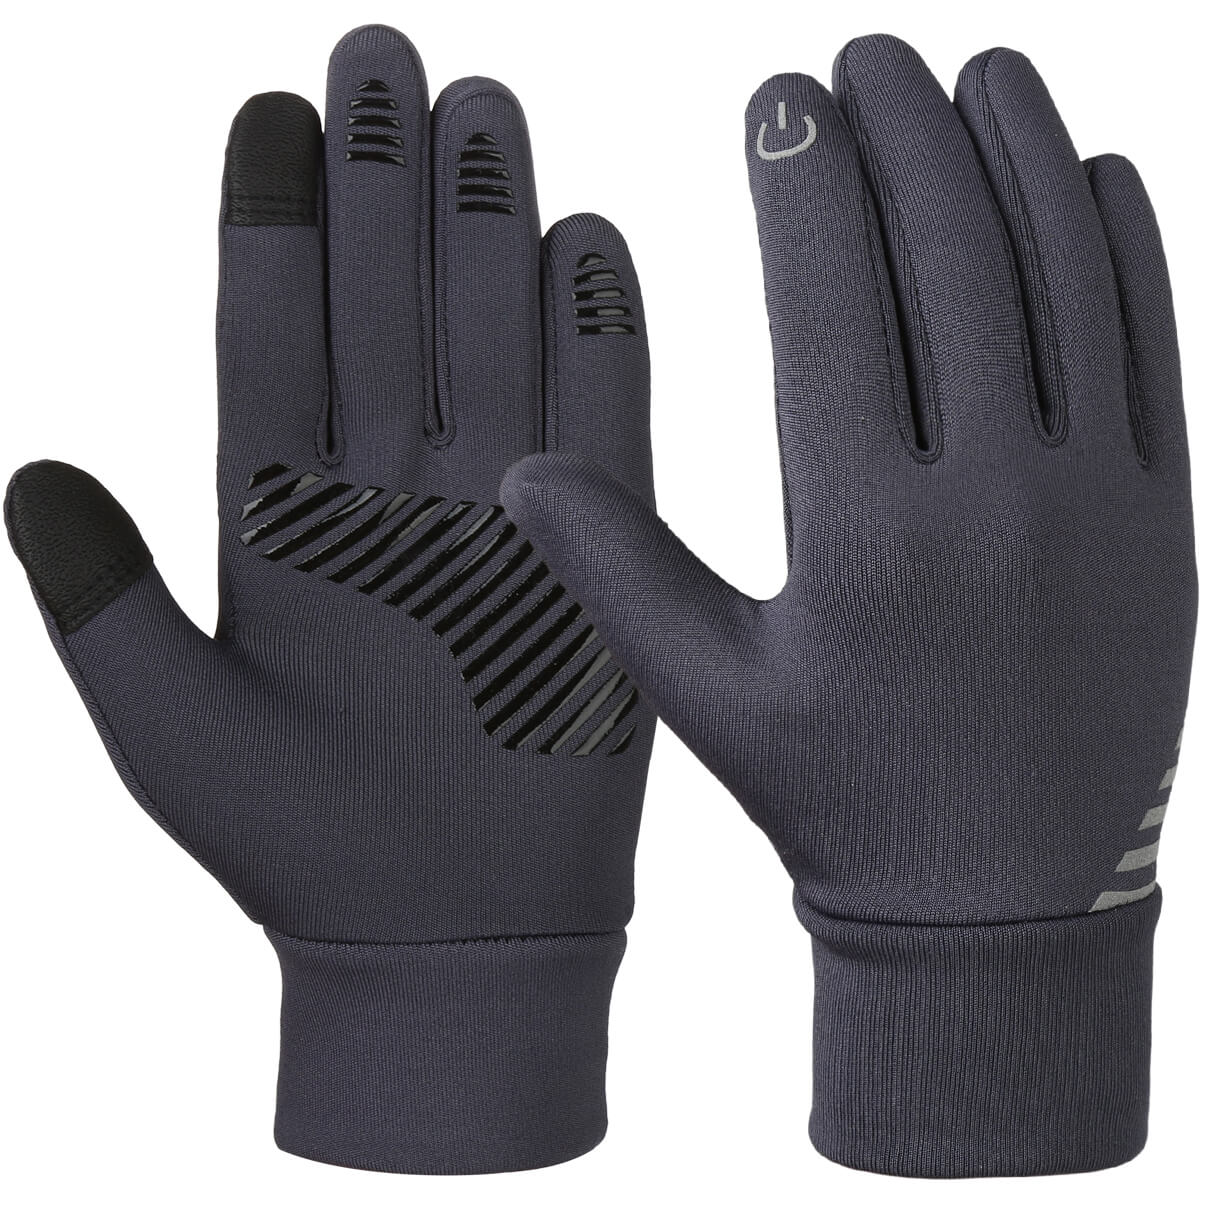 Things You Must Know Before Buying Winer Gloves